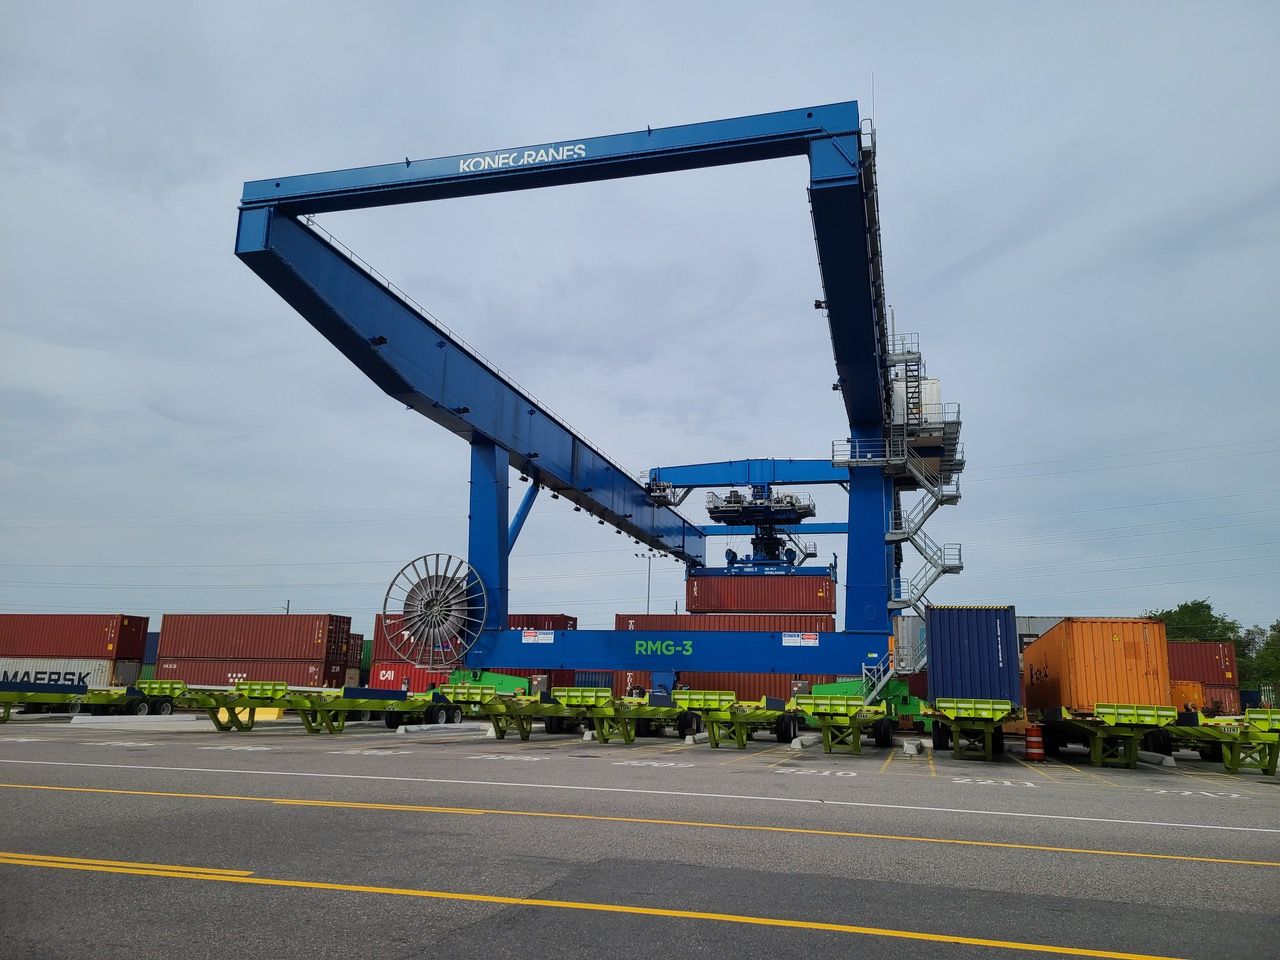 The lift heights can carry a container over a rail car stacked two containers high.